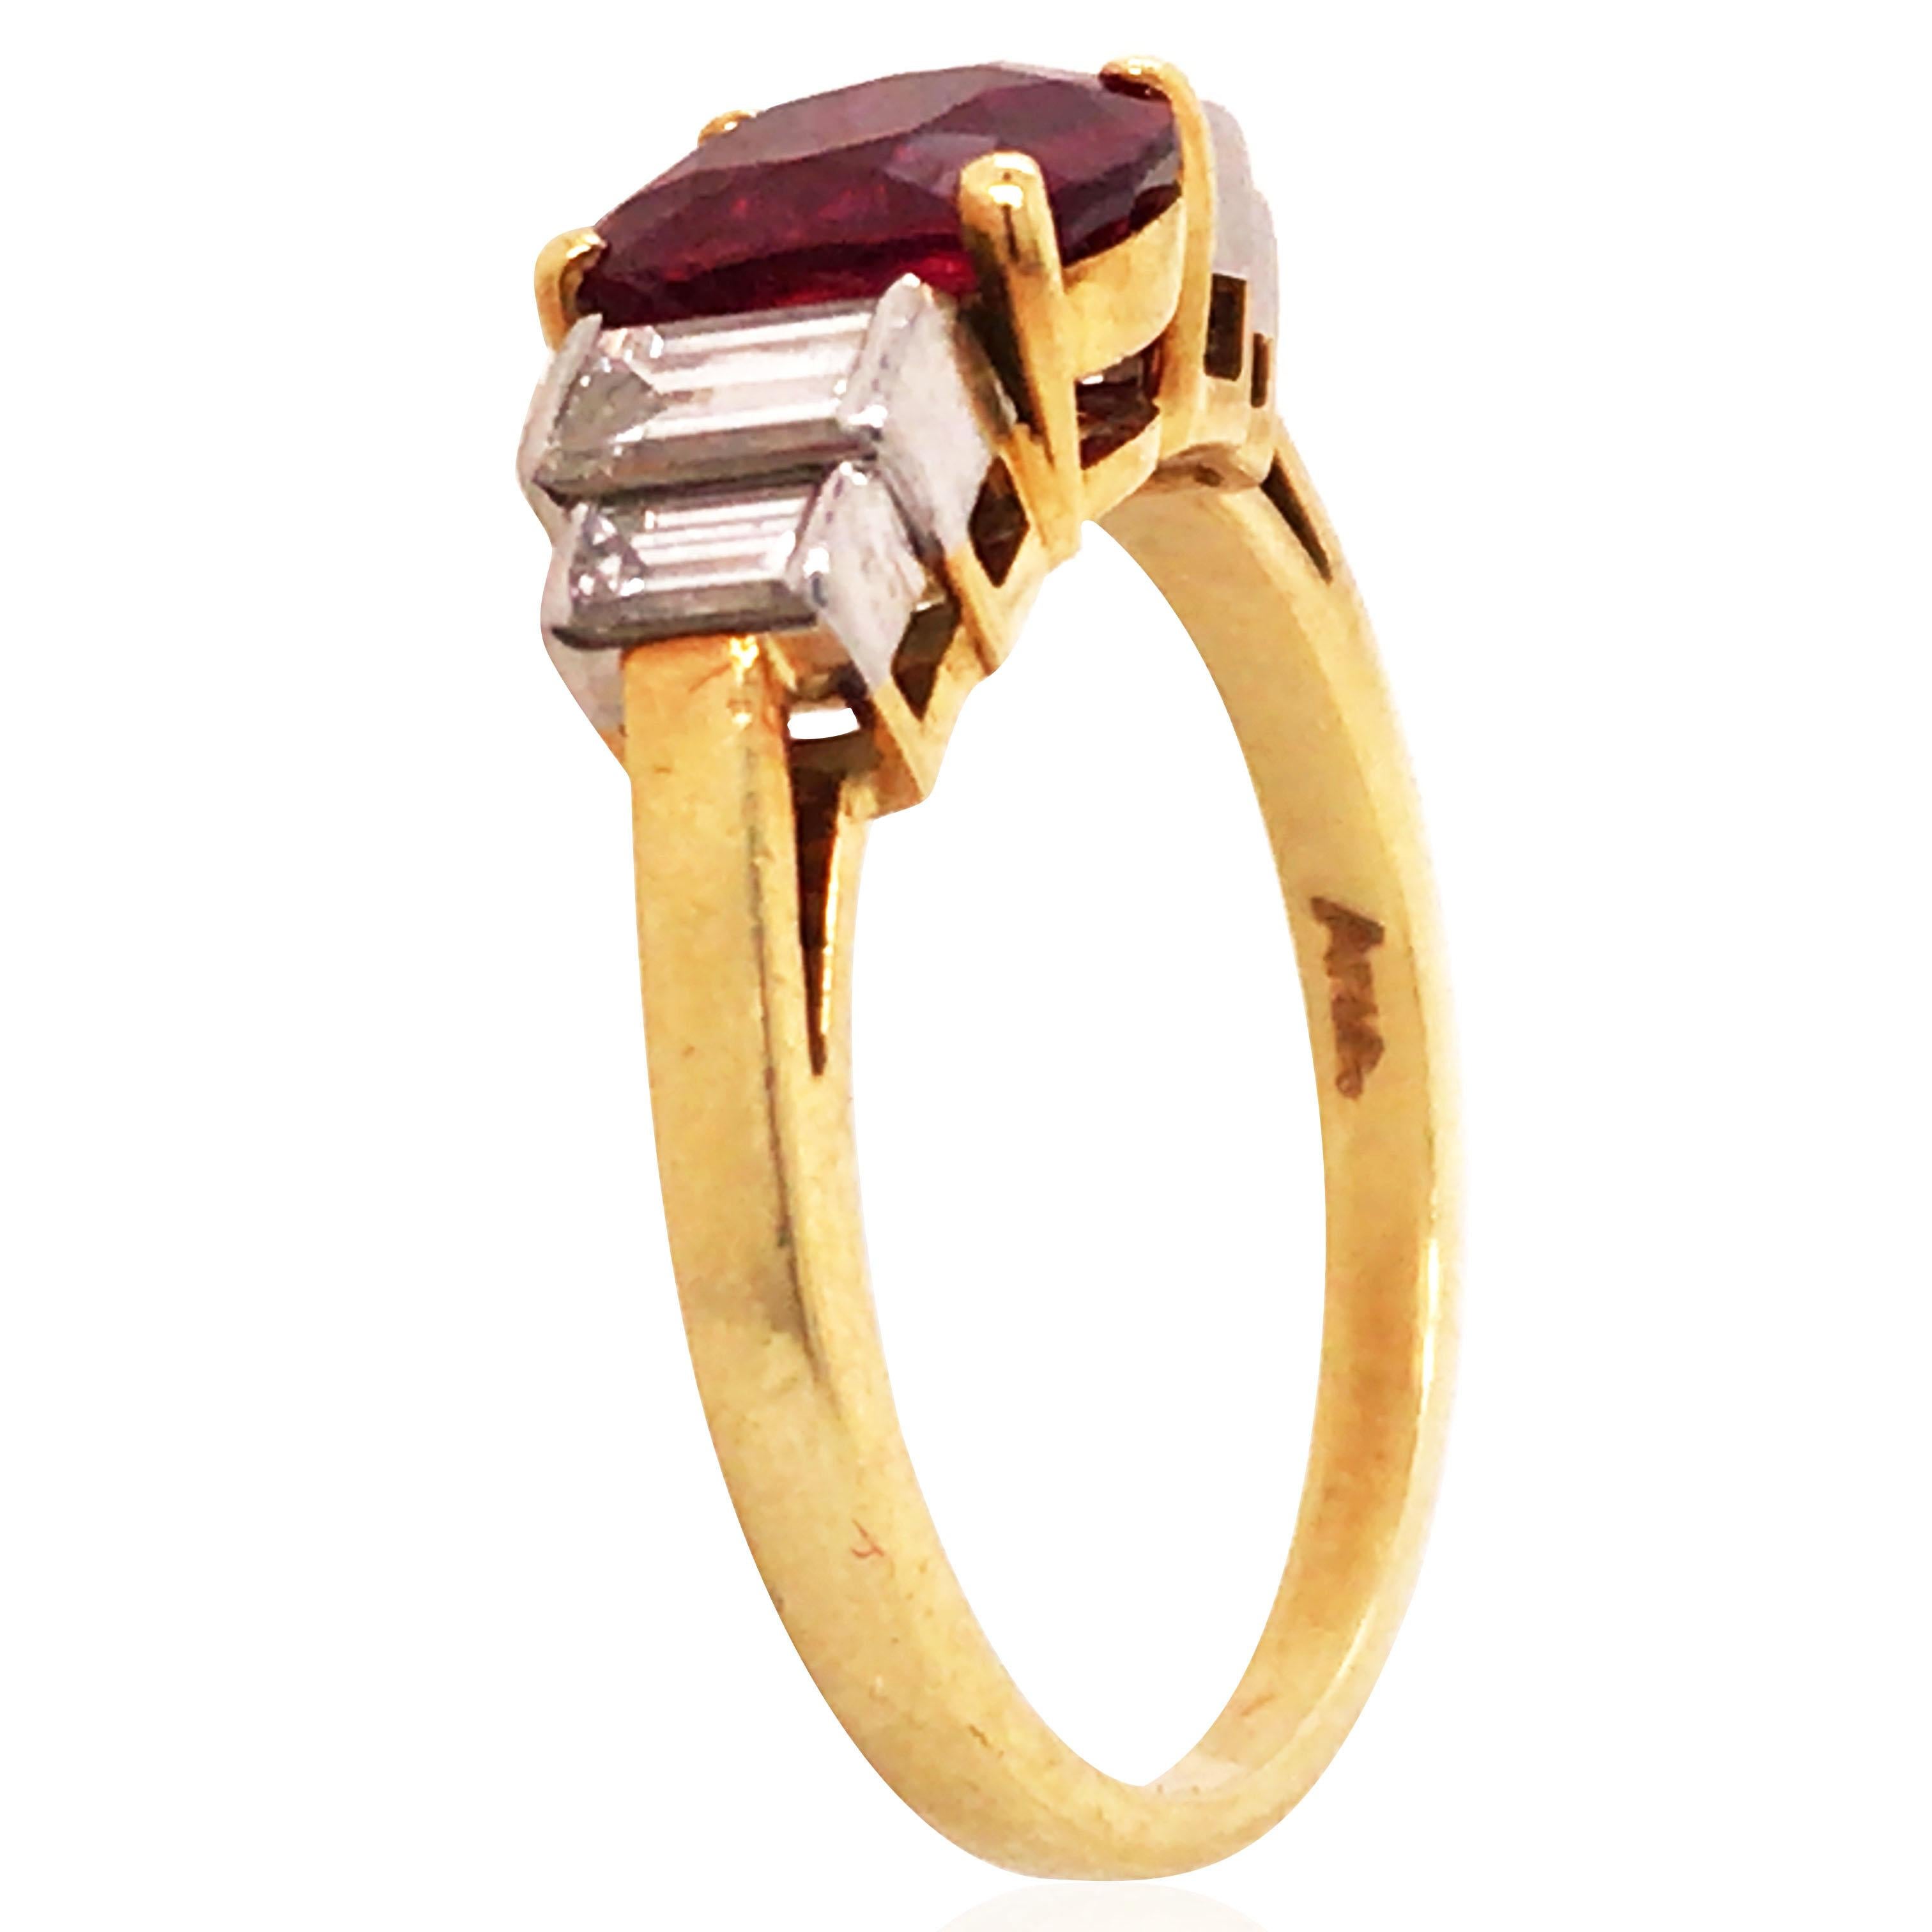 Cushion-shaped ruby approx. 2.0ct, baguette diamonds. Ring size: 6.5.

Stamp: British hallmarks, sponsor's mark for Asprey